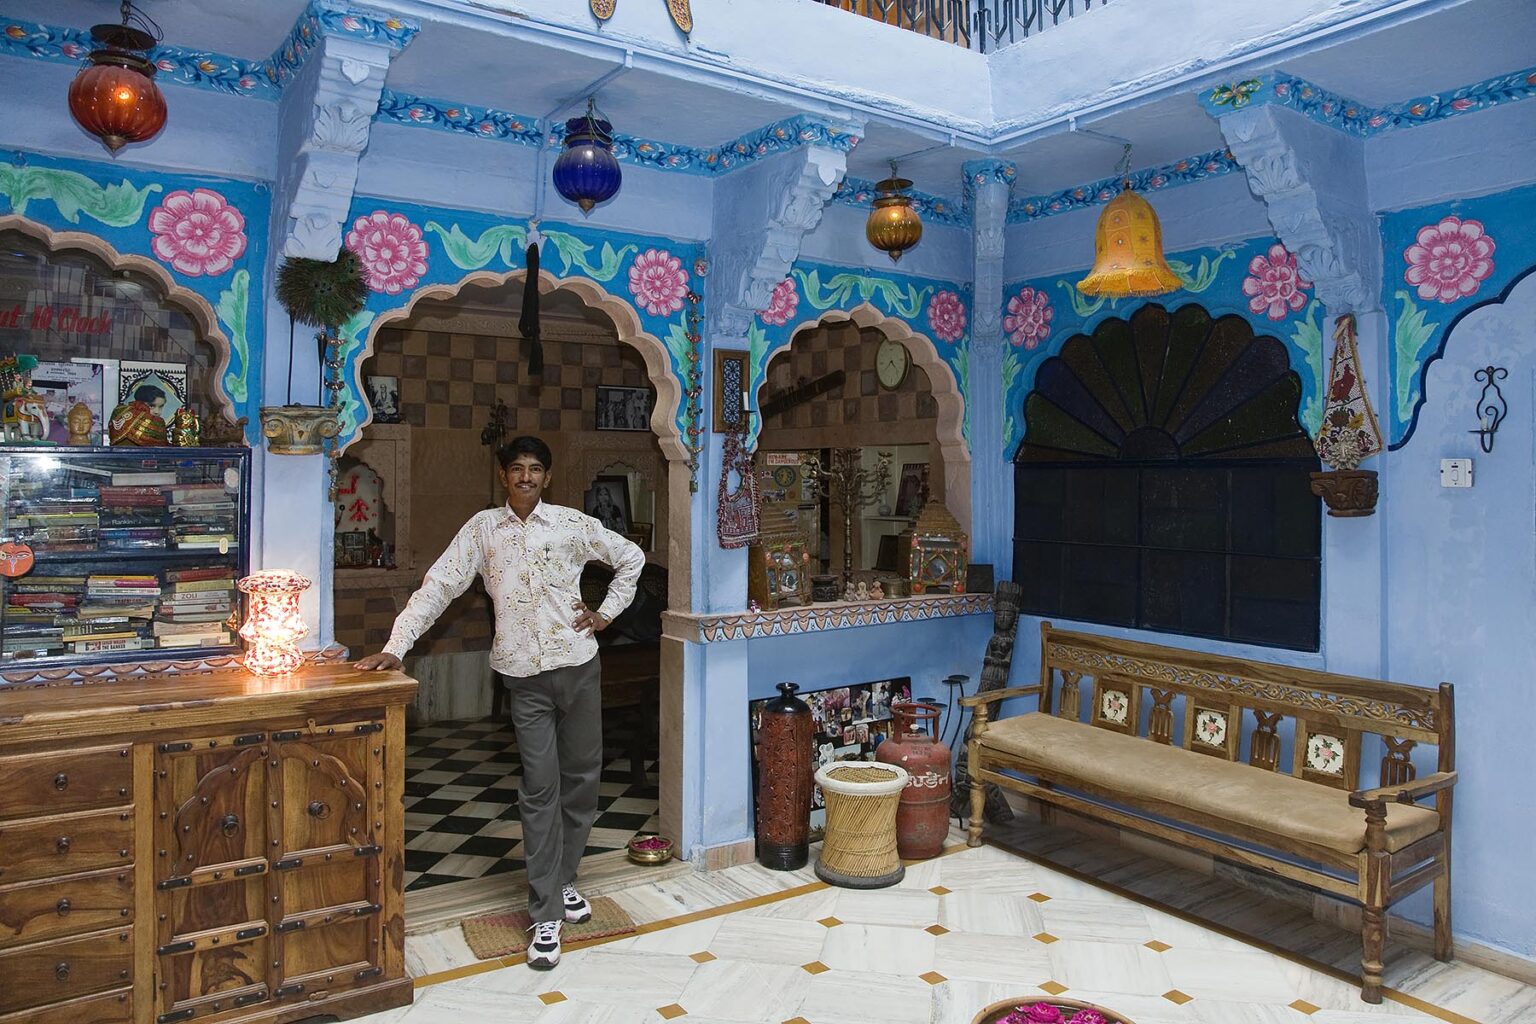 The lobby of YOGI'S GUEST HOUSE which is a popular place to stay and listed in the Lonely Planet Guide to India - JOHDPUR, RAJASTHAN, INDIA